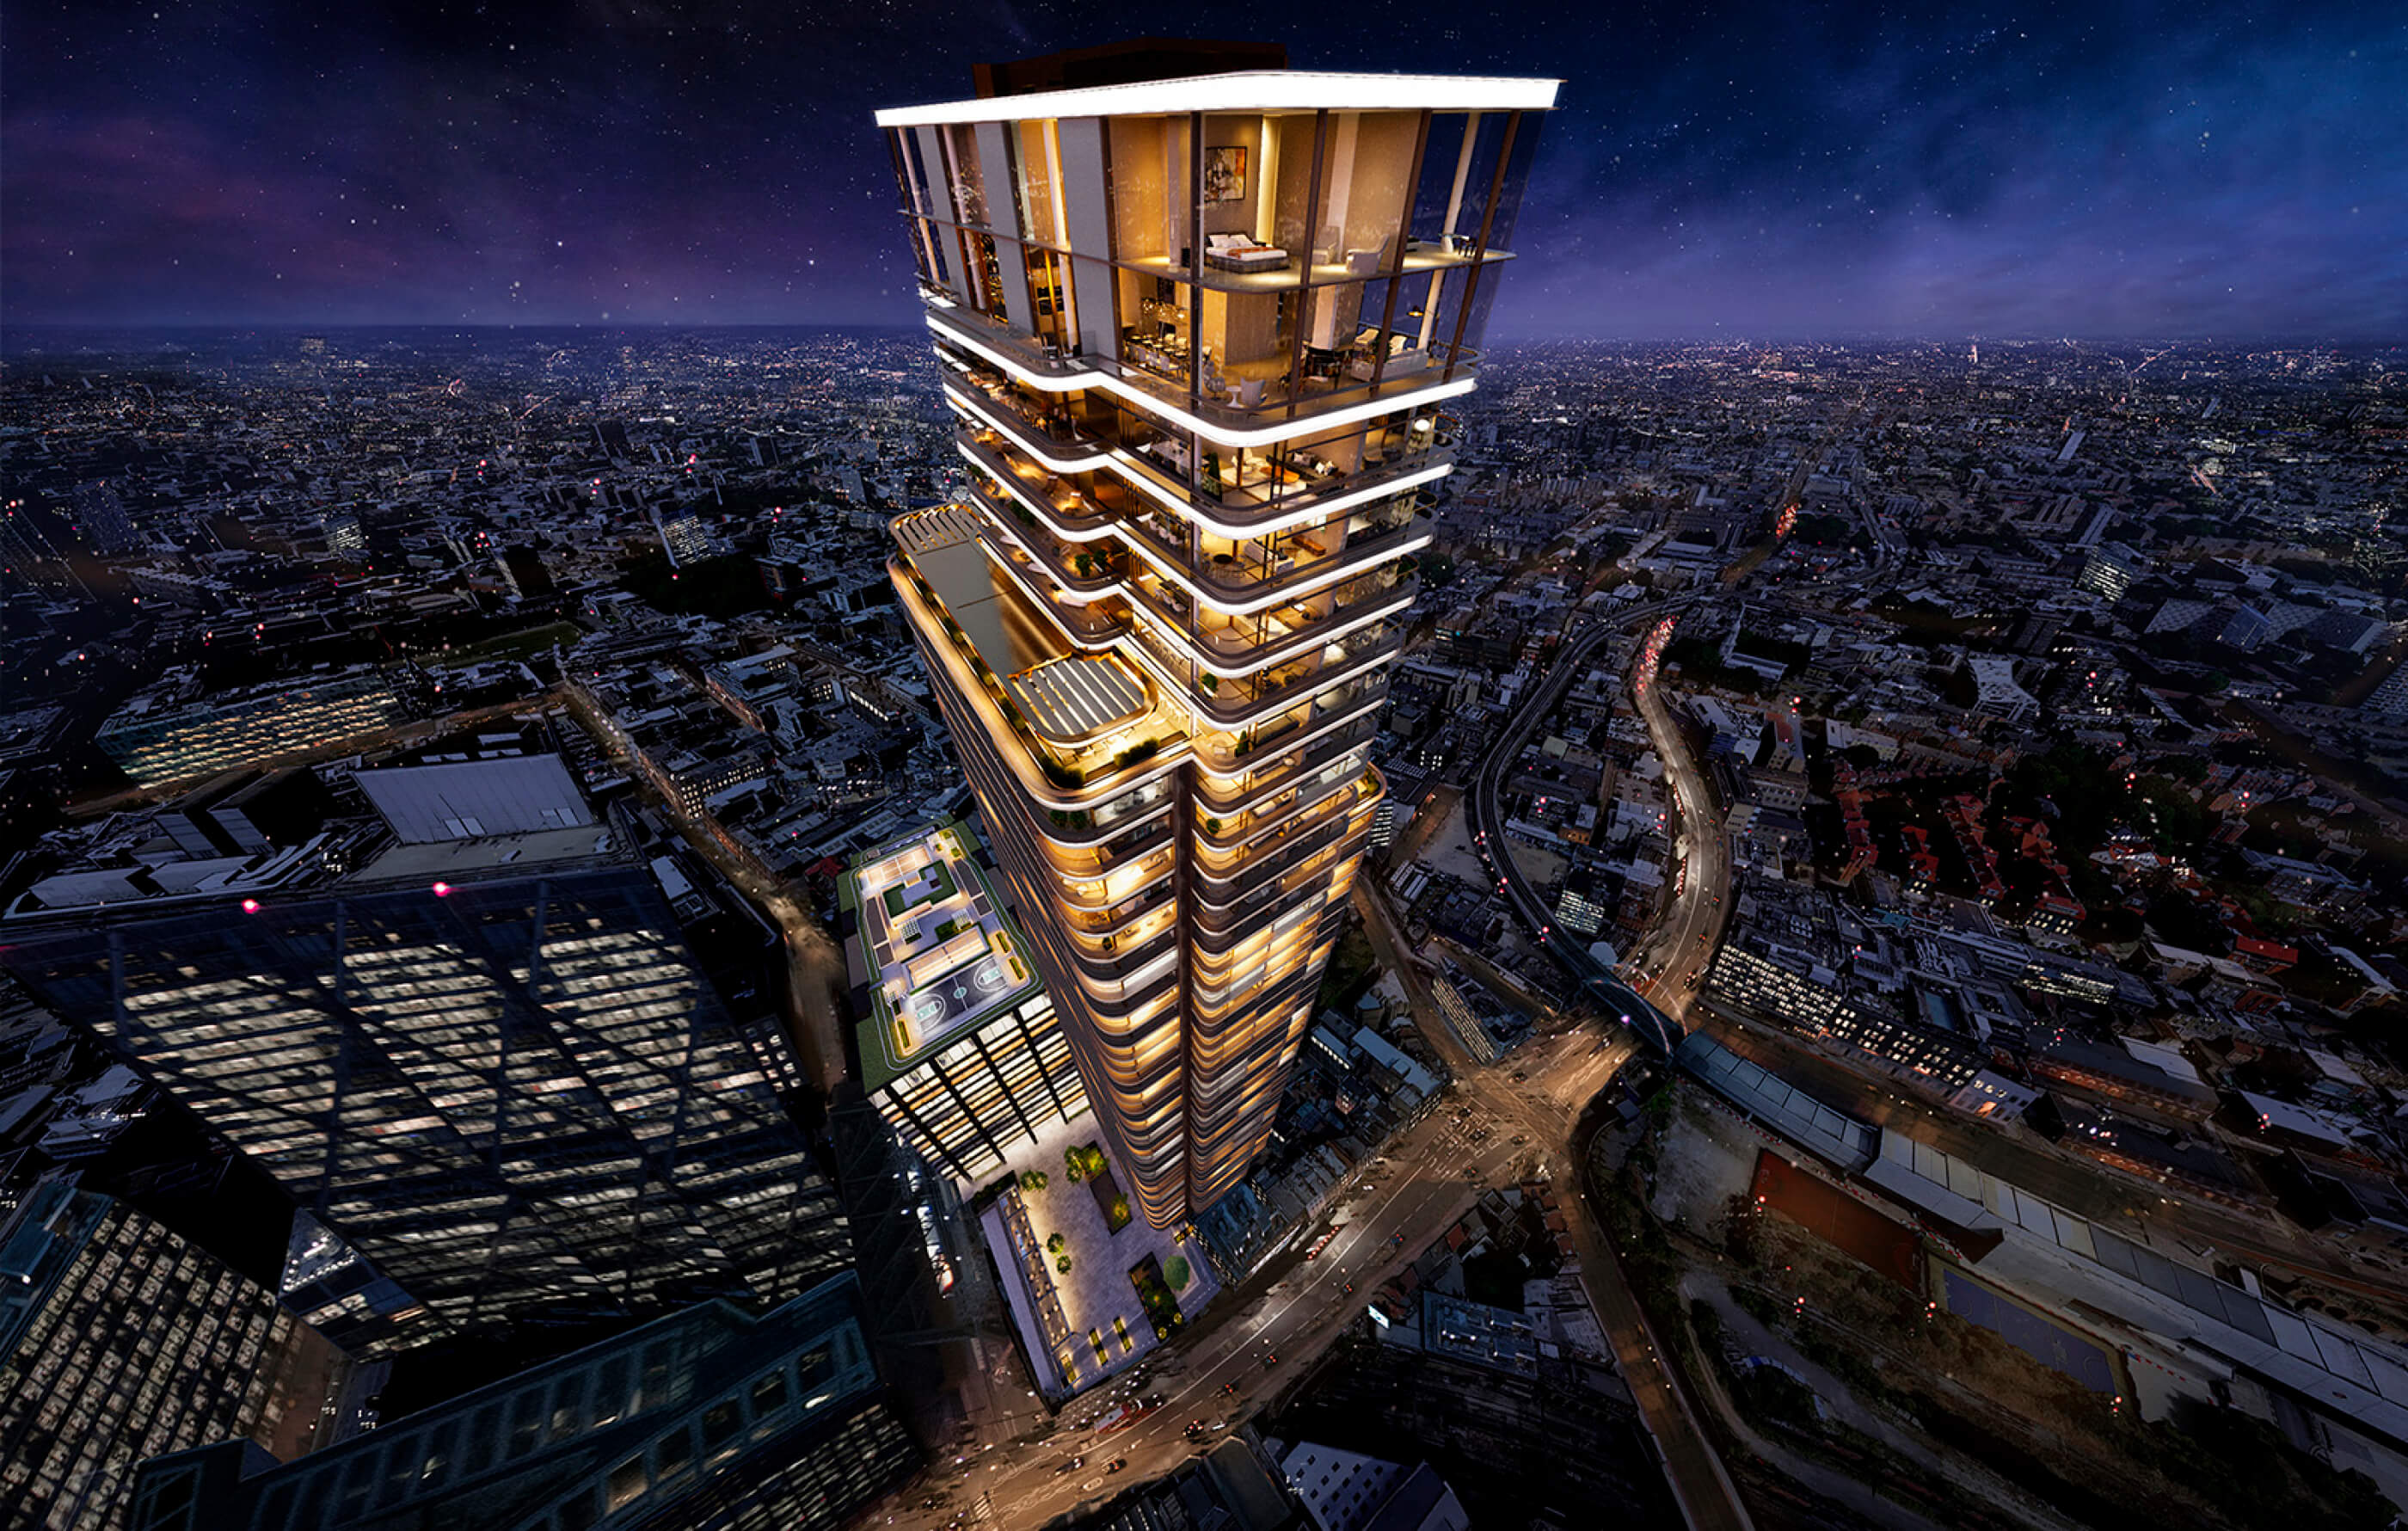 Aerial view of Principal Tower at night with the penthouse illuminated, looking down at the city lights of London below